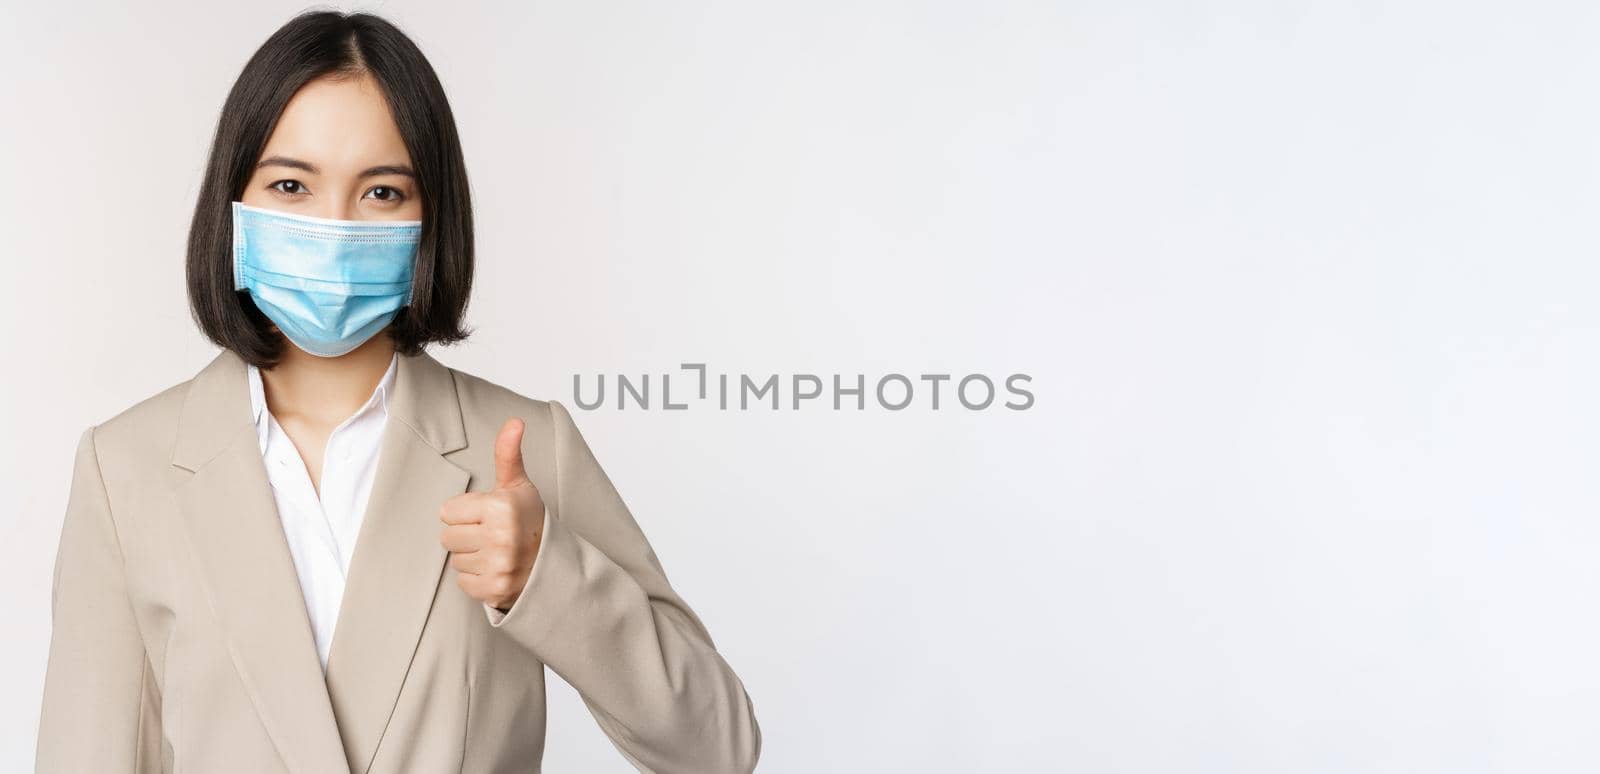 Coronavirus and workplace concept. Portrait of businesswoman in medical face mask showing thumbs up, wearing business suit, standing over white background.